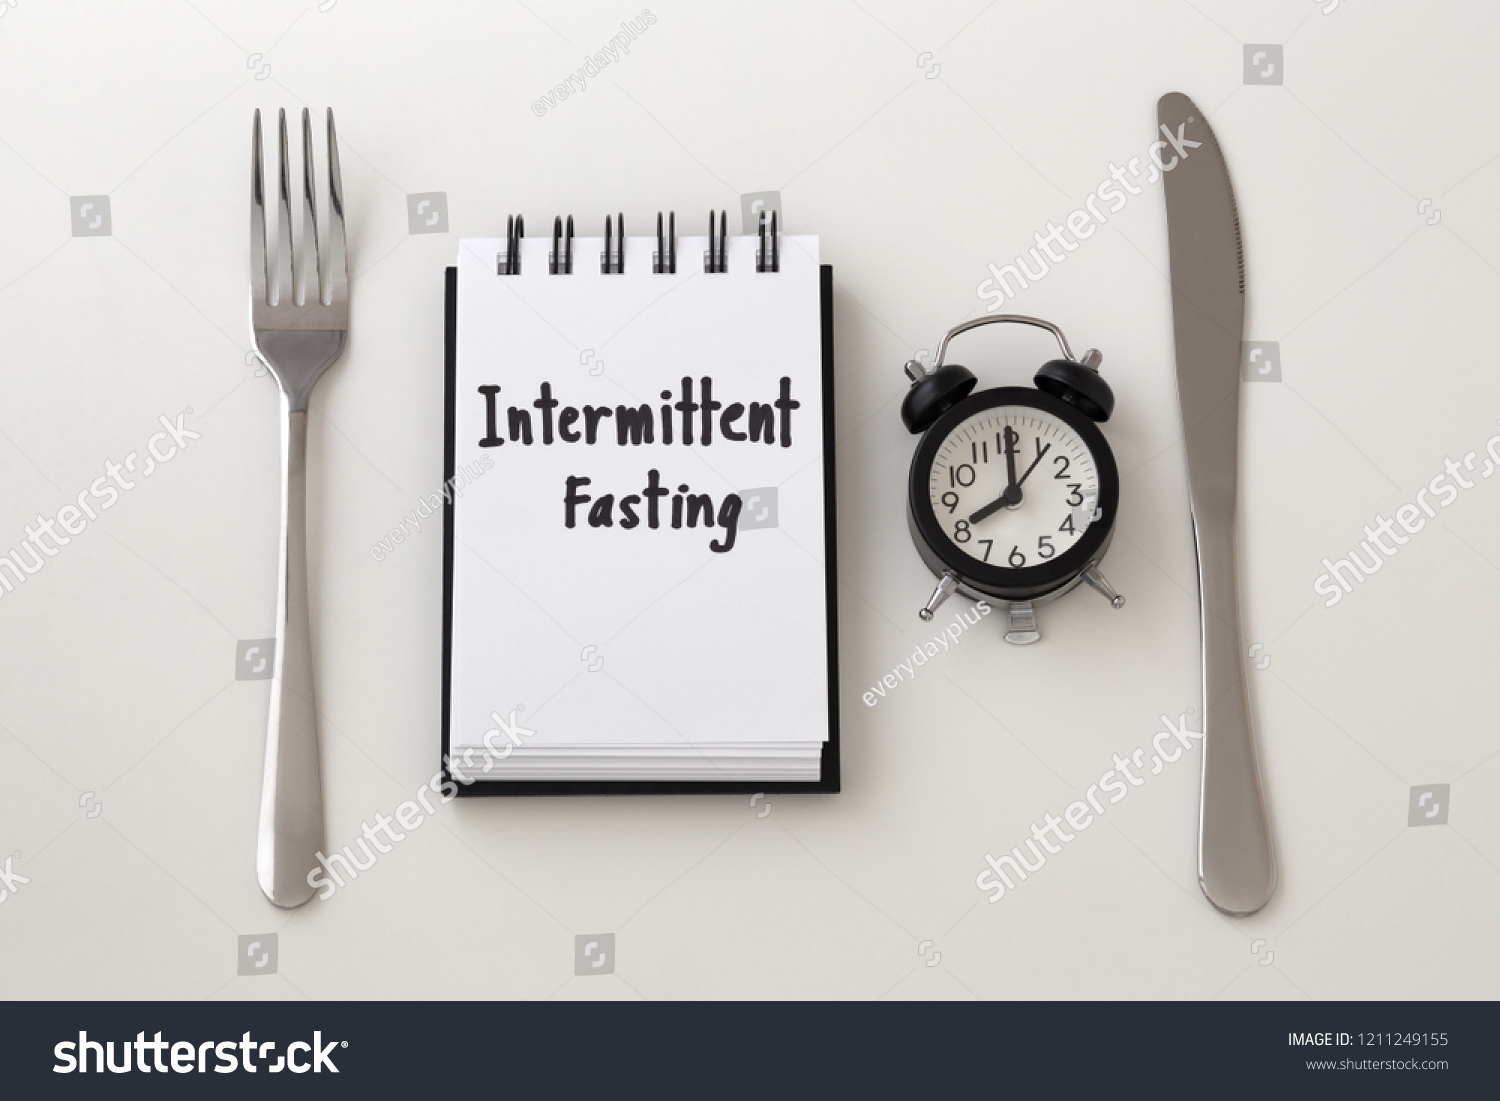 Intermittent fasting word on notepad with clock, fork and knife, weight loss plan #1211249155